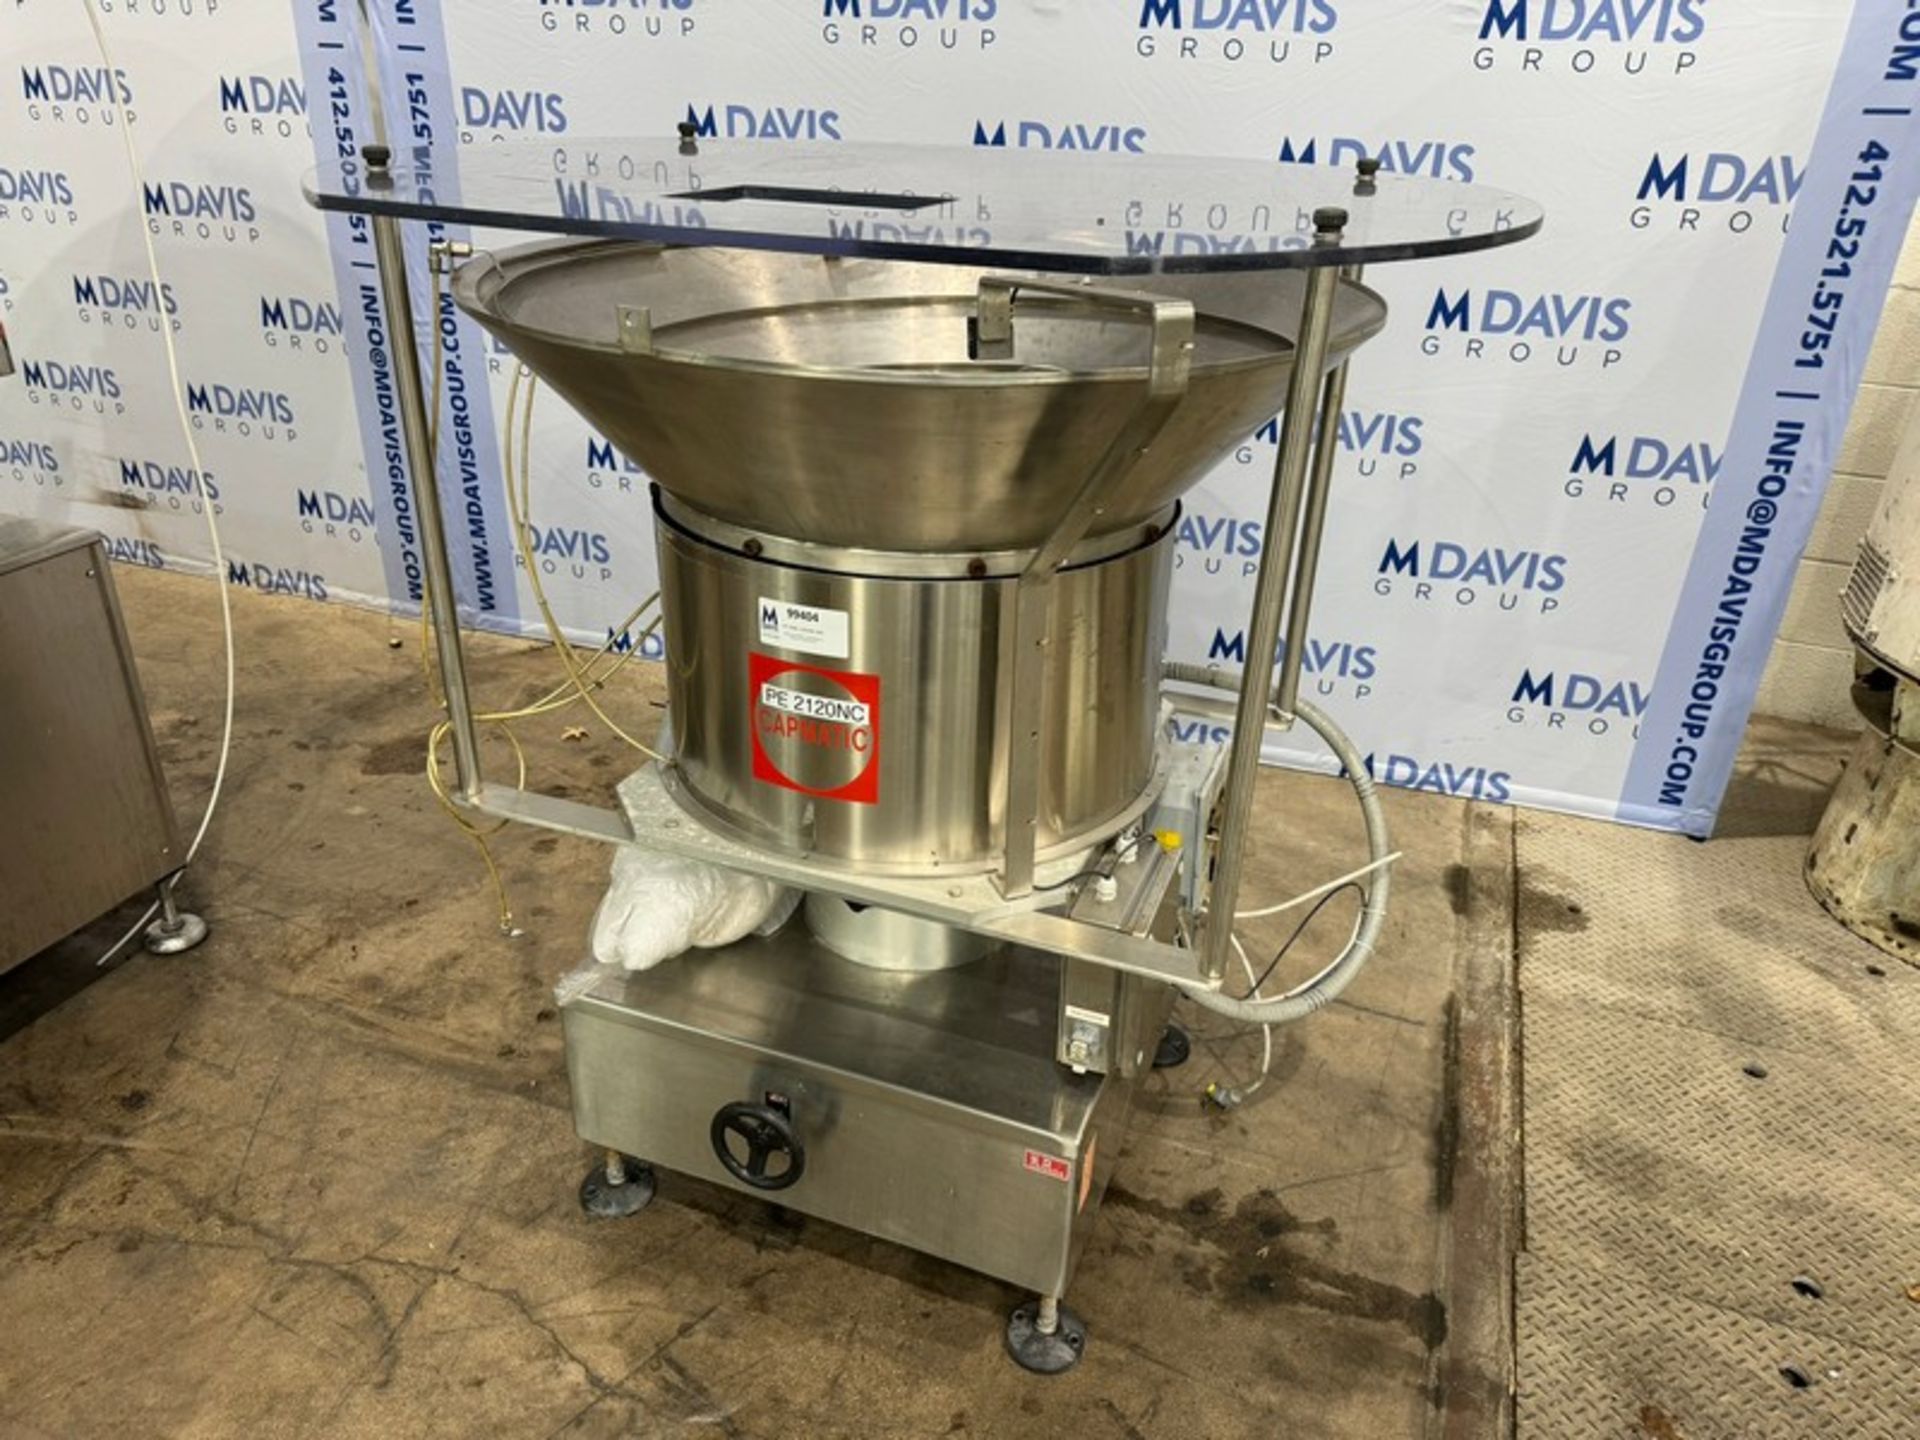 Capmatic S/S Vibratory Hopper, Mounted on S/S Frame (INV#99404) (Located @ the MDG Auction